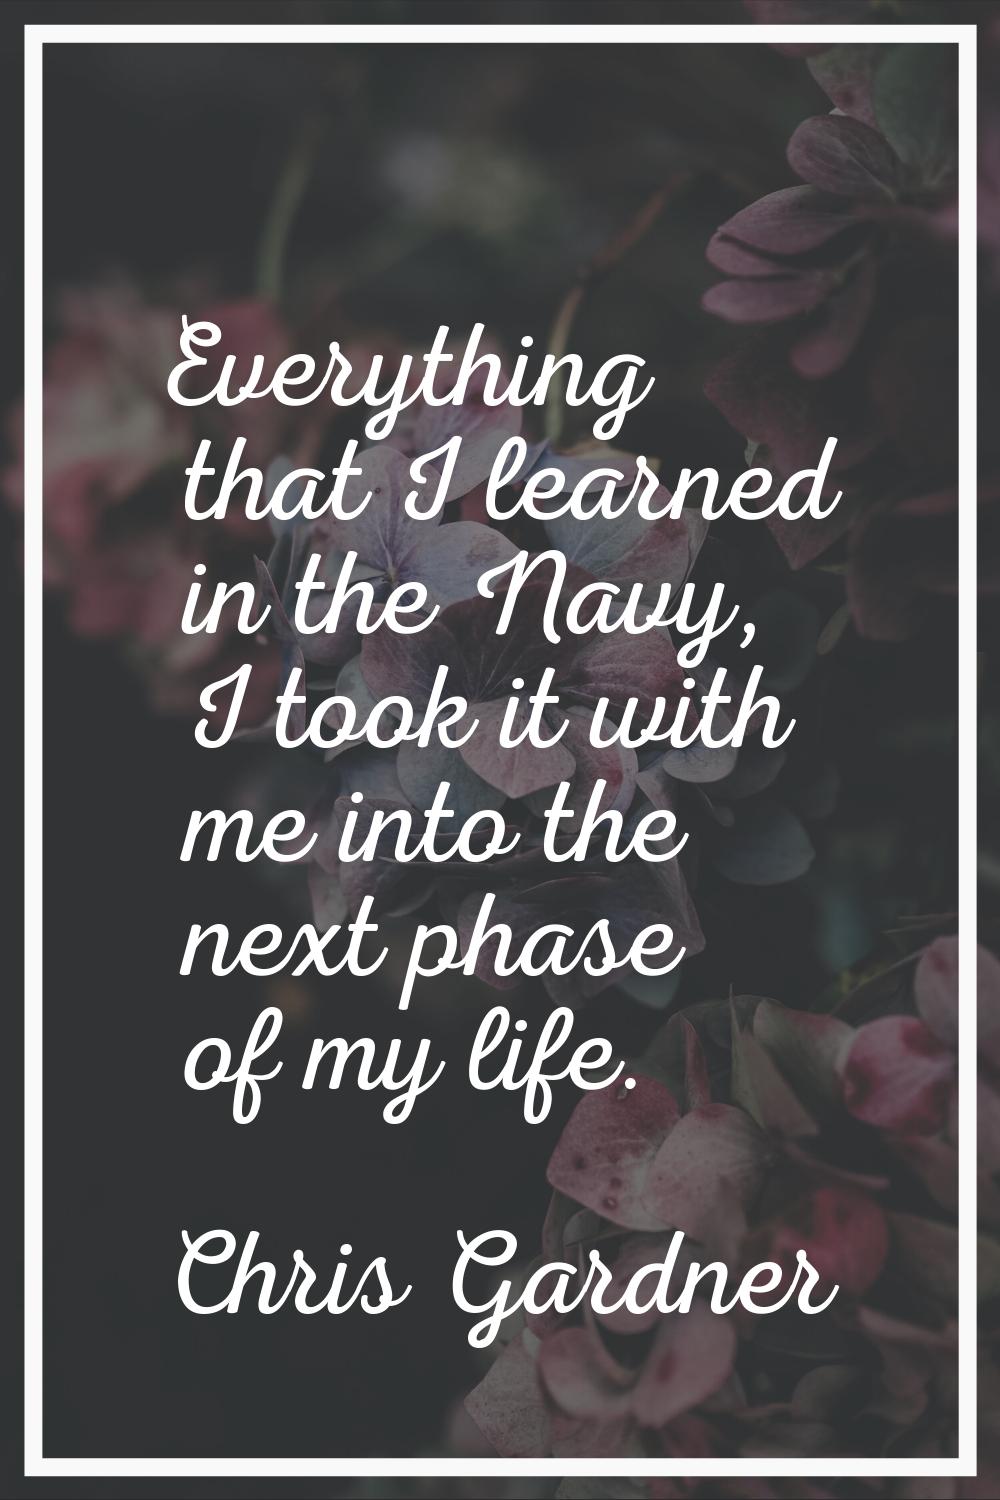 Everything that I learned in the Navy, I took it with me into the next phase of my life.